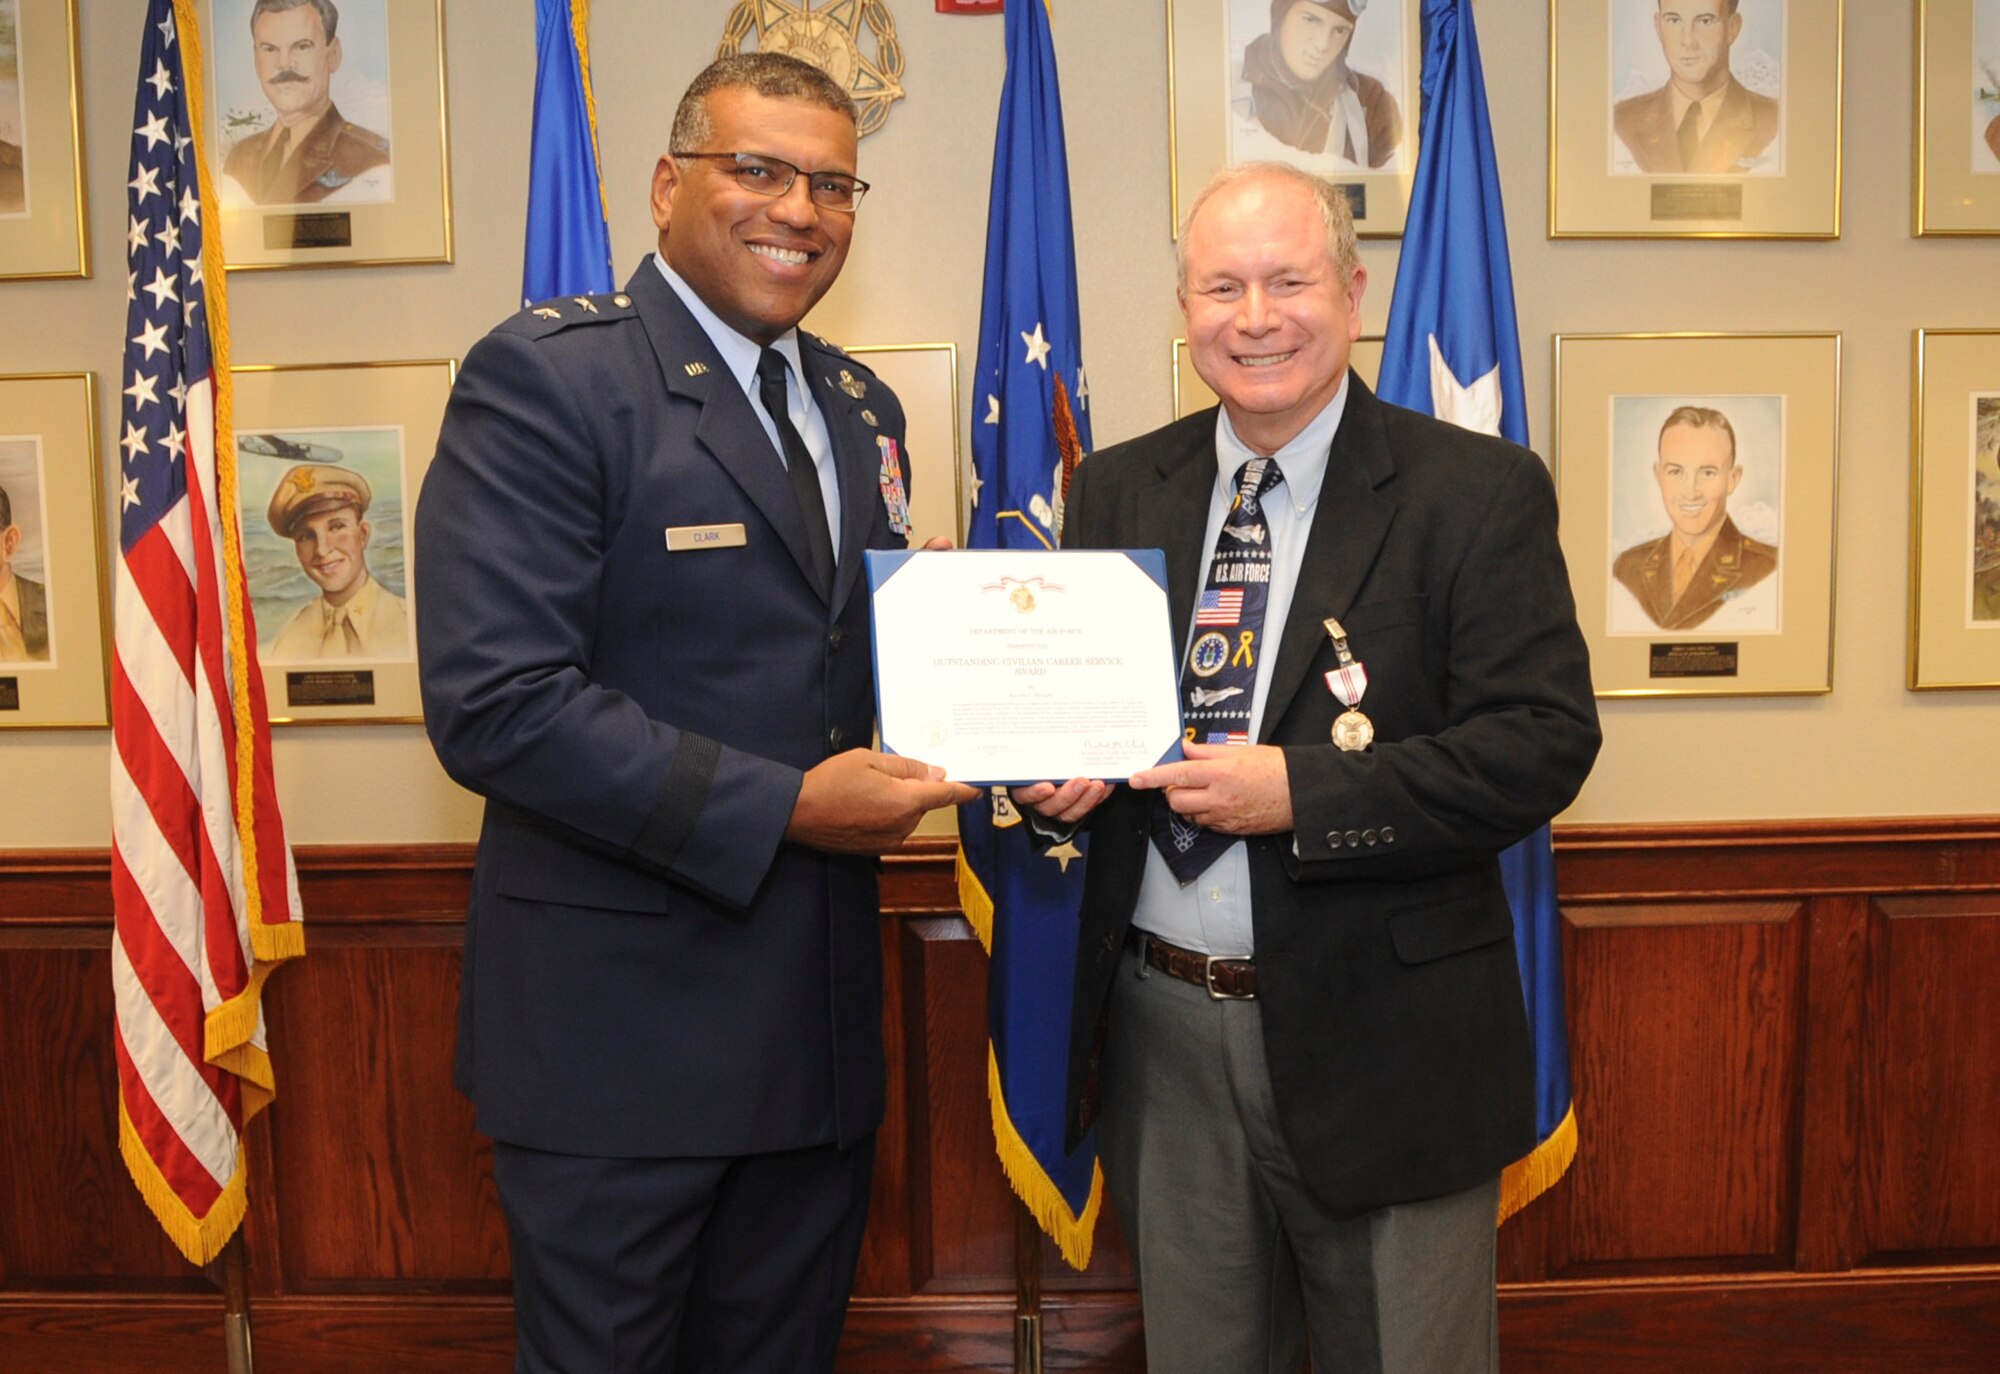 U.S. Maj. Gen. Richard M. Clark, Eighth Air Force commander, hands Ed Wempe, Eighth Air Force Intelligence Directorate technical director, the Outstanding Civilian Career Service Award during Wempe's retirement ceremony at Barksdale AFB, La., Aug. 18, 2016. For Wempe, the award signifies more than four decades of active duty and civil service within Intelligence career field. (U.S. photo by Amn Alexis Schultz)